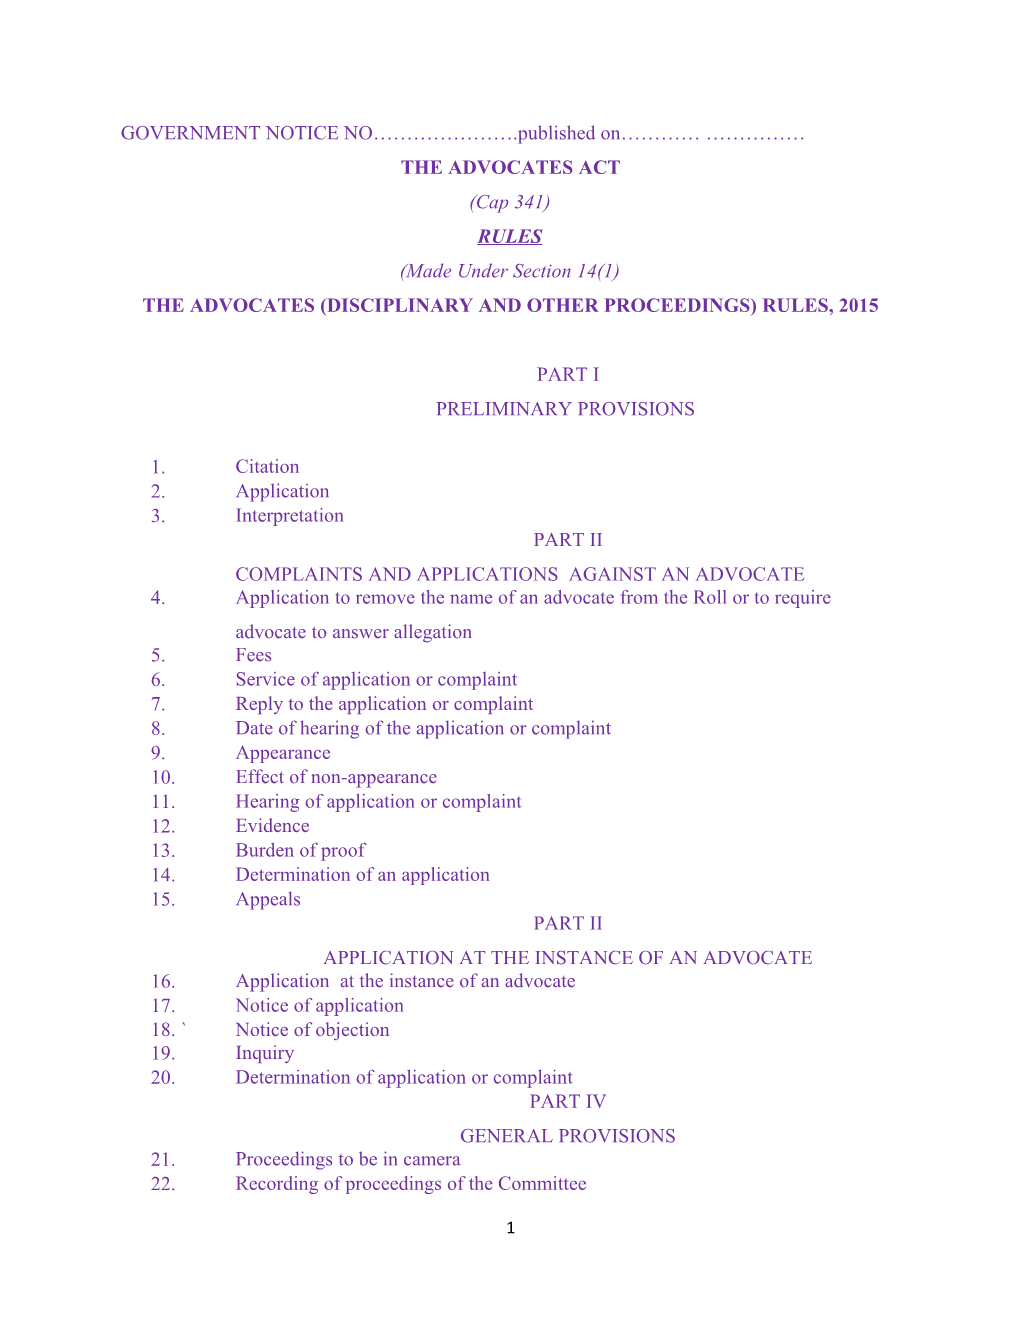 The Advocates (Disciplinary and Other Proceedings) Rules, 2015